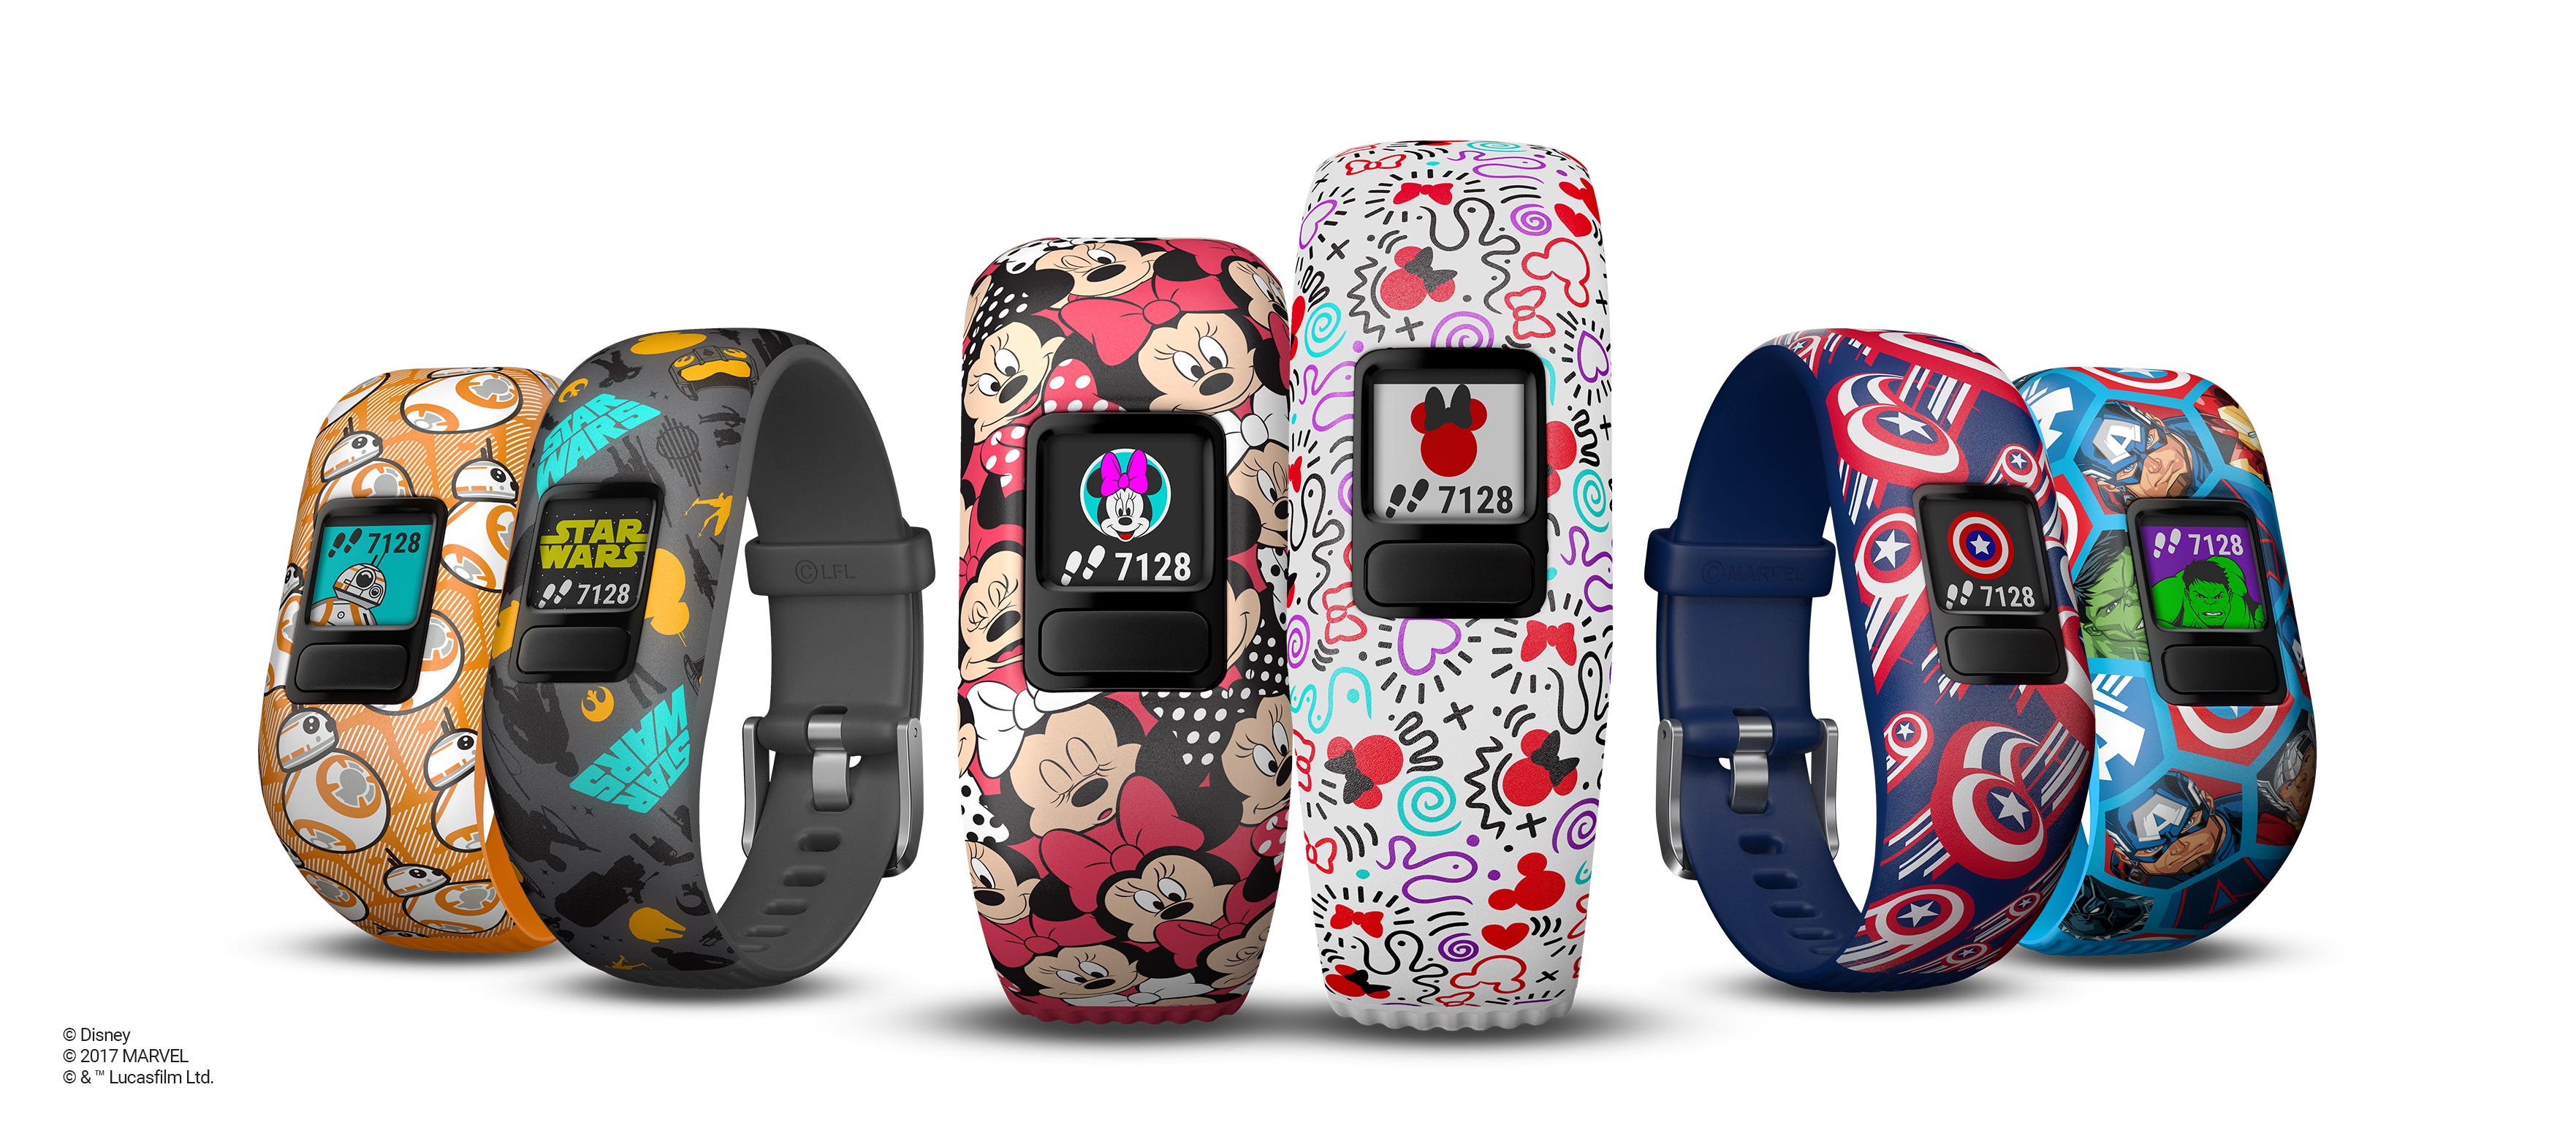 kids fitbit with gps